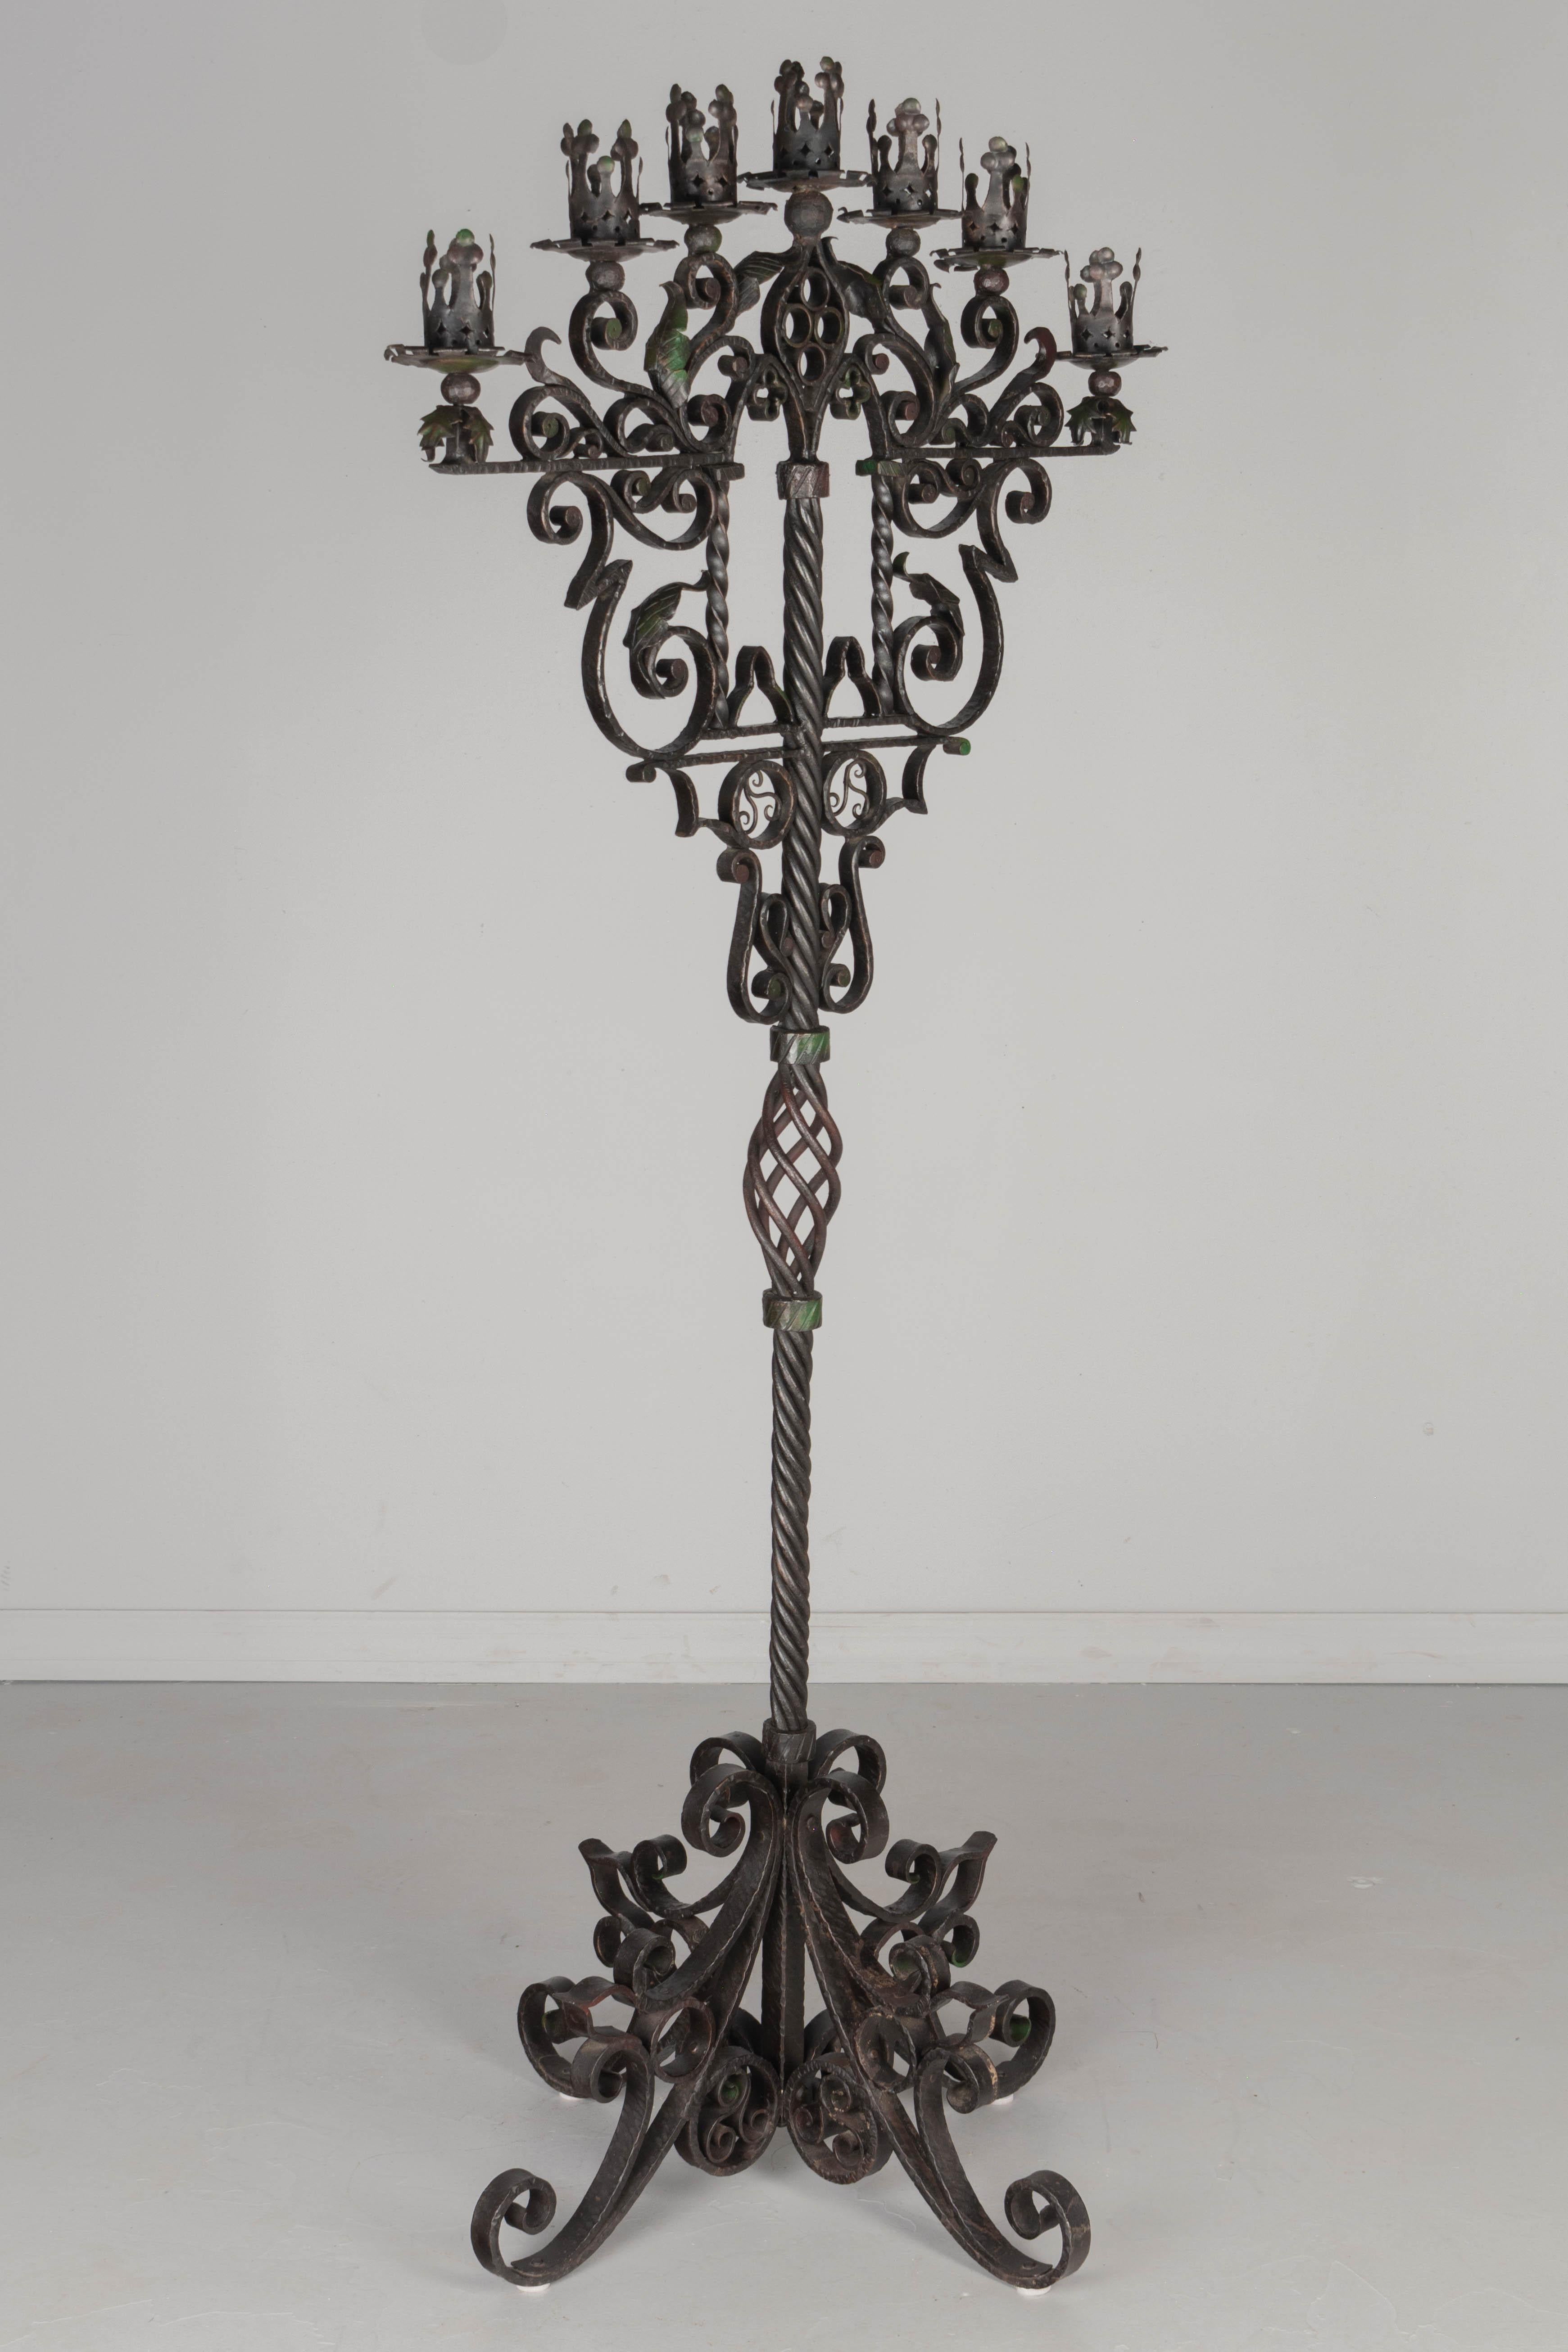 A large Spanish Baroque style wrought iron seven-light floor torchère, or candelabra with hand forged scrolling iron work and tôle acanthus leaves. Heavy base and thick center post with twisted center decoration. Black finish with some remnants of